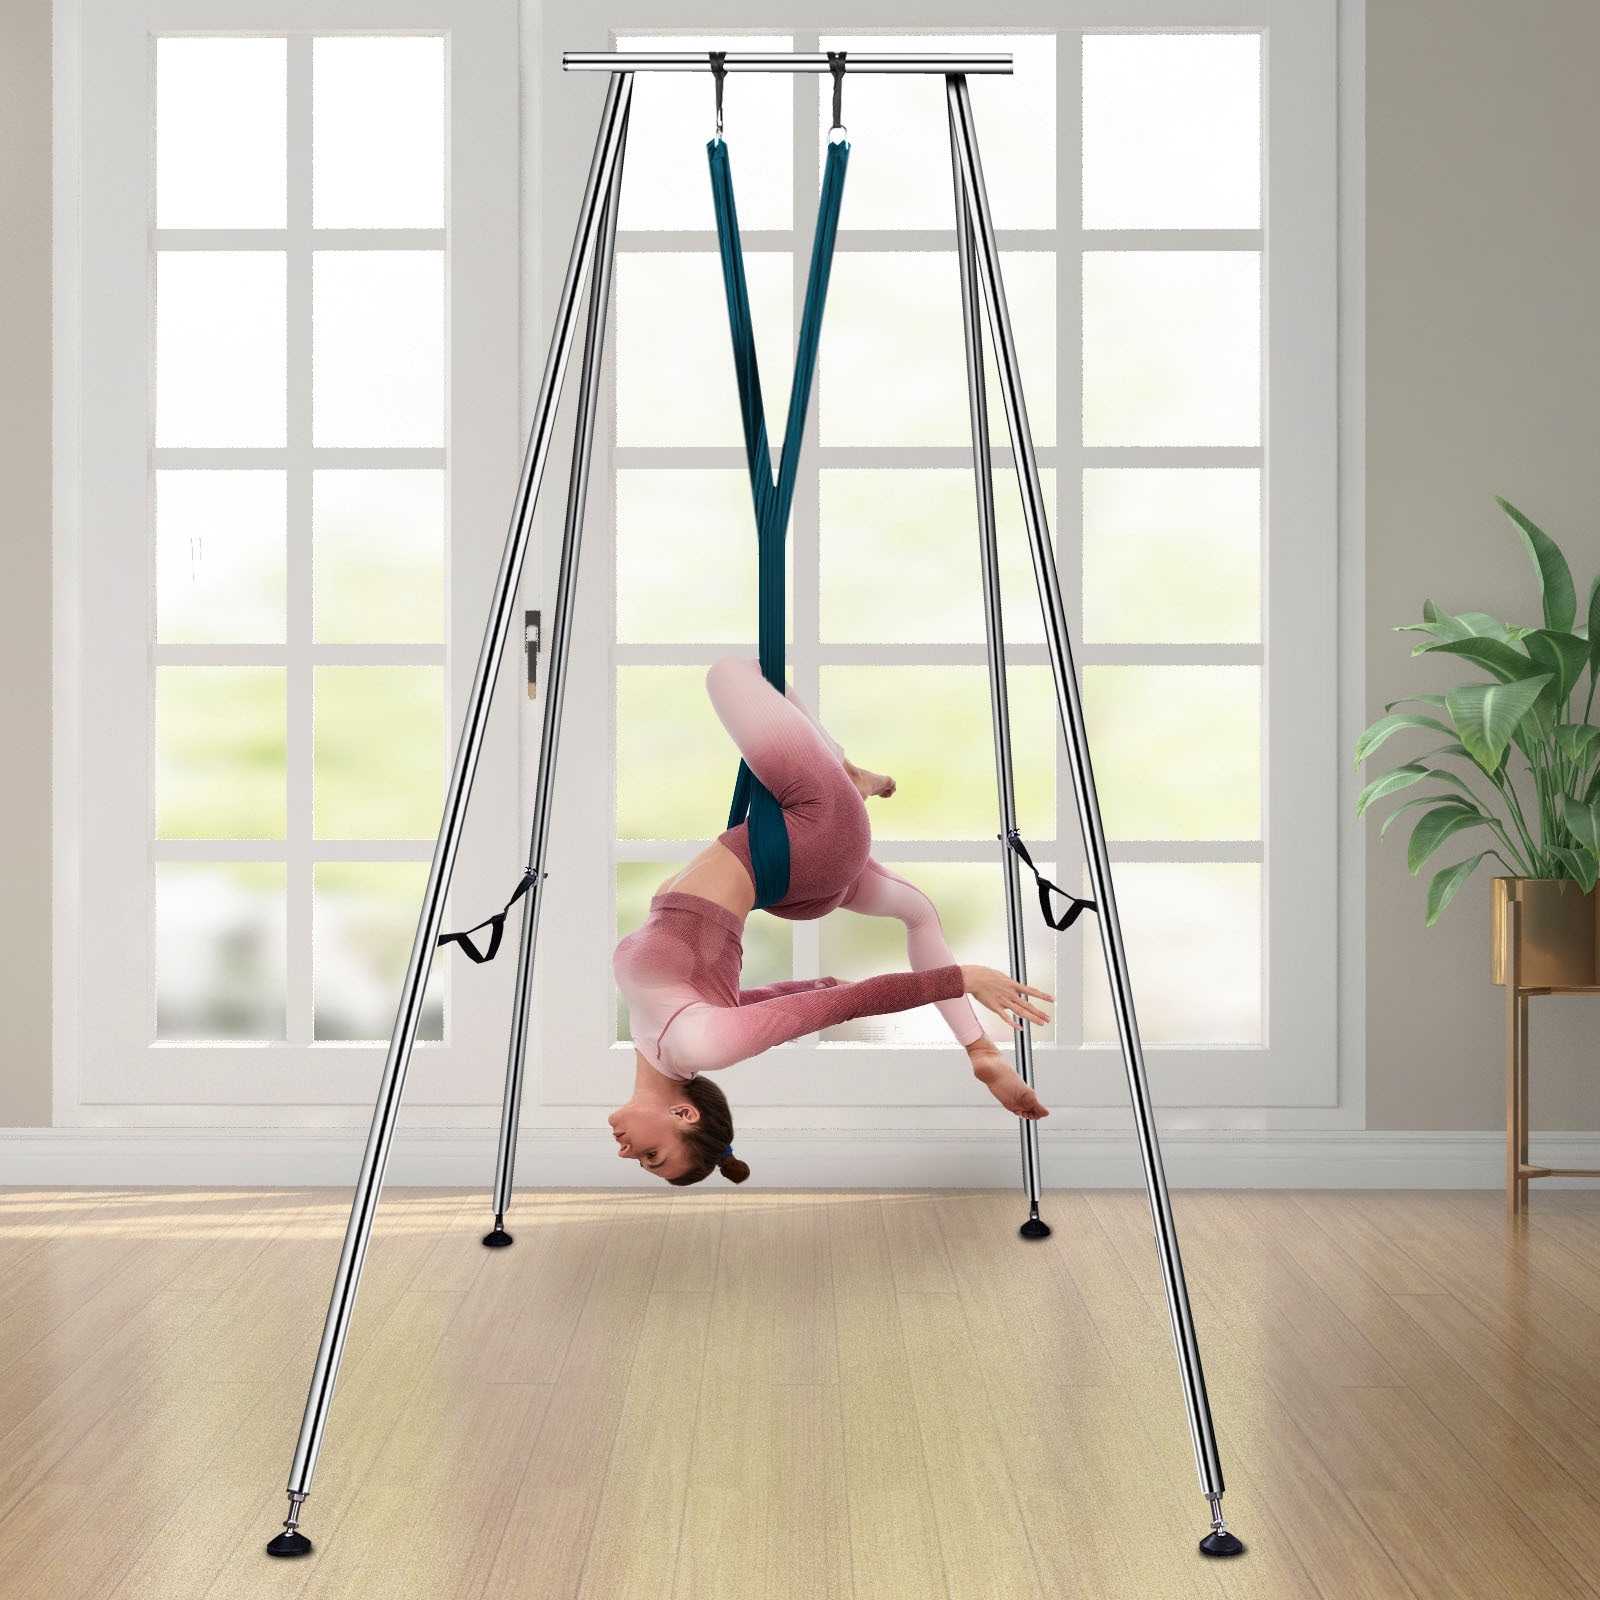 https://ak1.ostkcdn.com/images/products/is/images/direct/fb059dd6dd7efff77eef4575565be8ea71fe432e/VEVOR-Aerial-Trapeze-Stand-Portable-Aerial-Rig-Yoga-Swing-Bar-Horizontal-Bracket.jpg